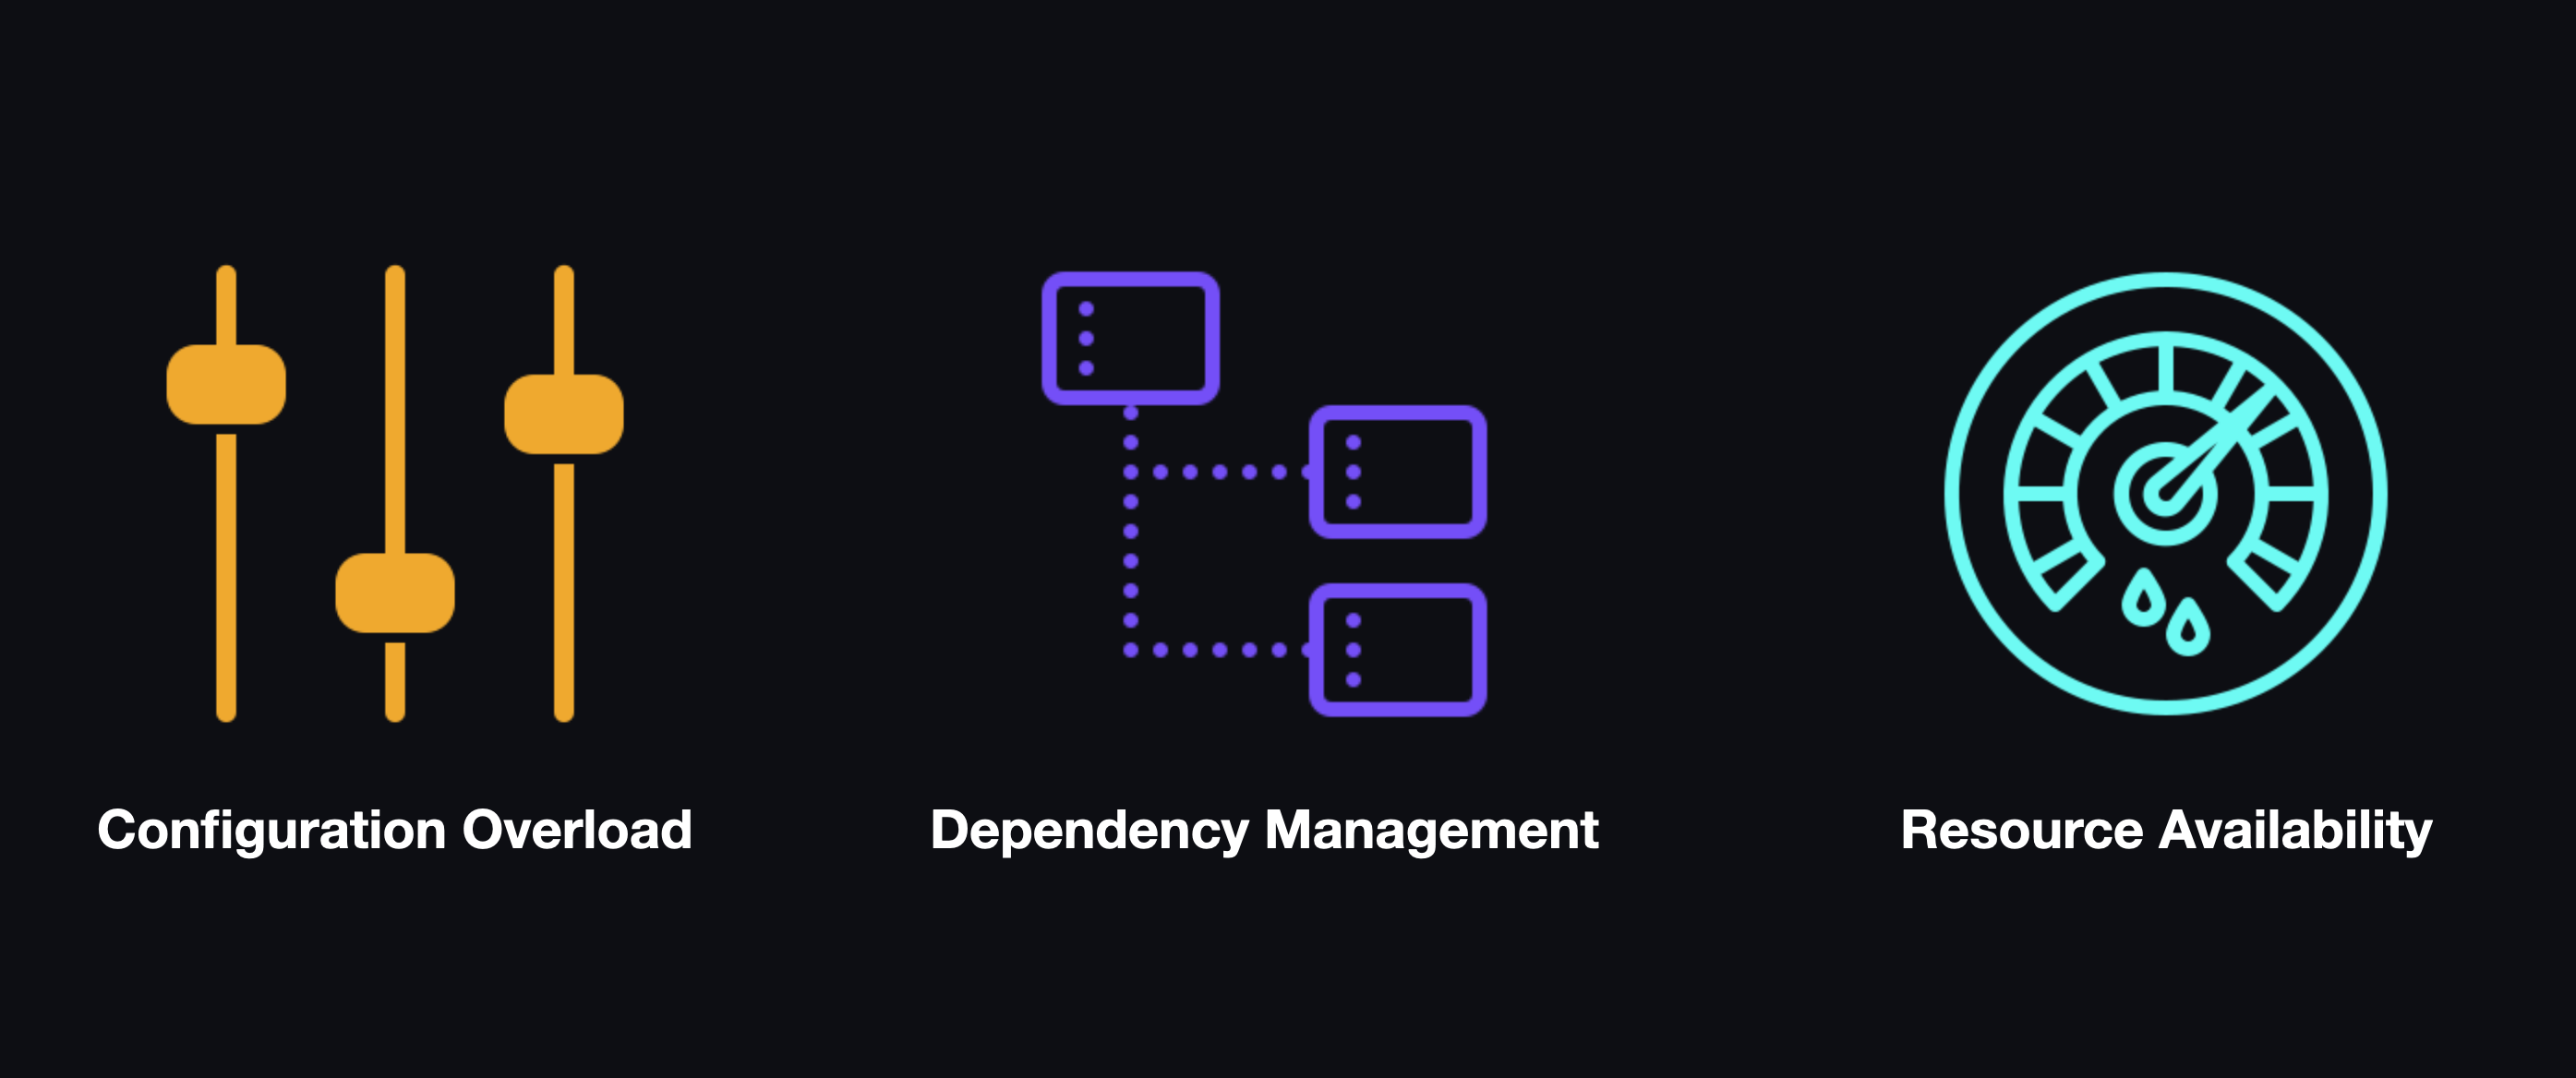 Three images representing configuration overload, dependency management, and resource availability.